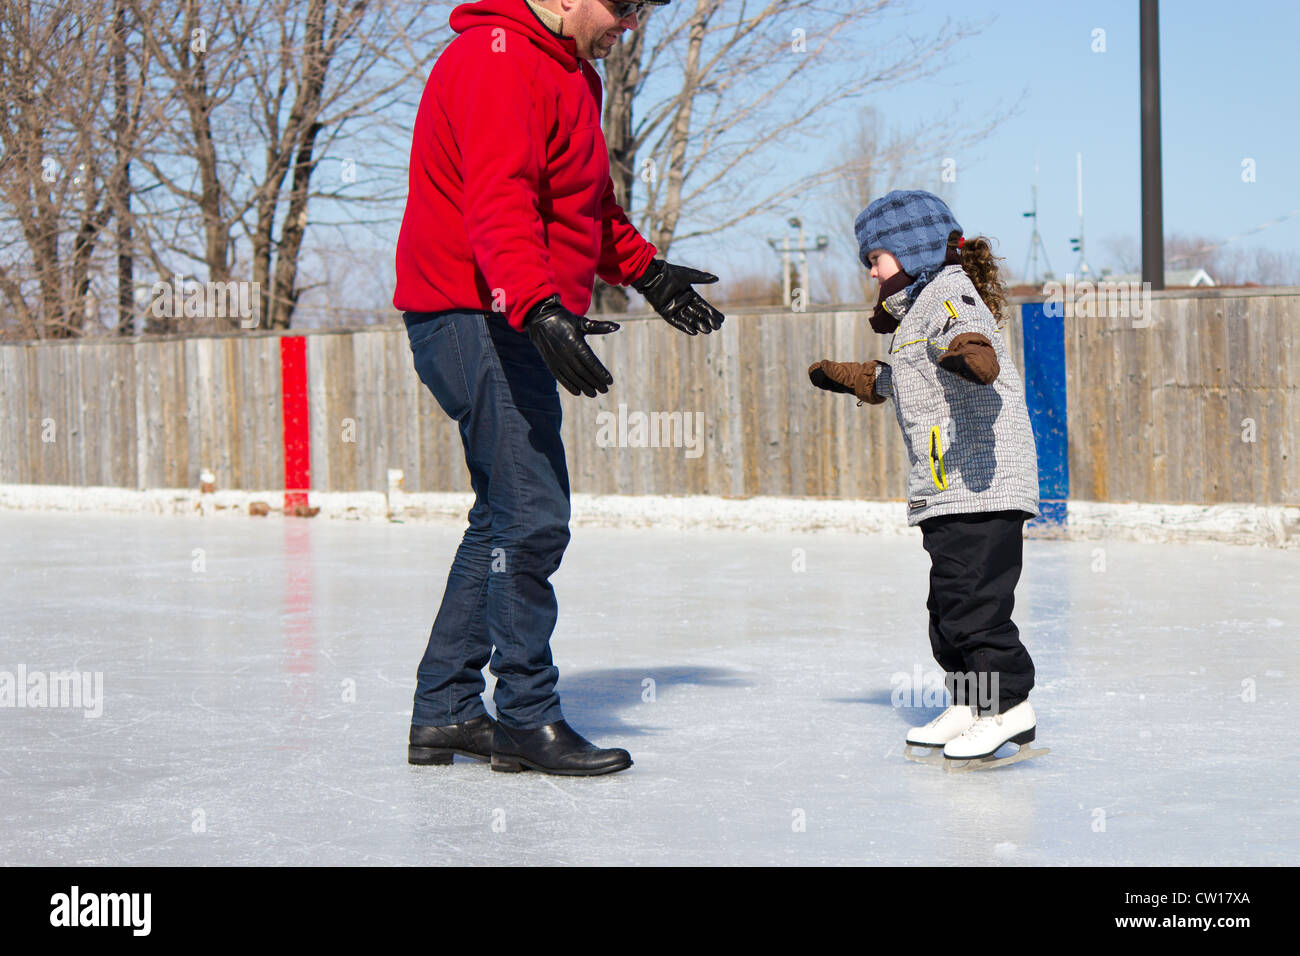 Father teaching daughter how to ice skate at an outdoor skating rink in winter. Stock Photo